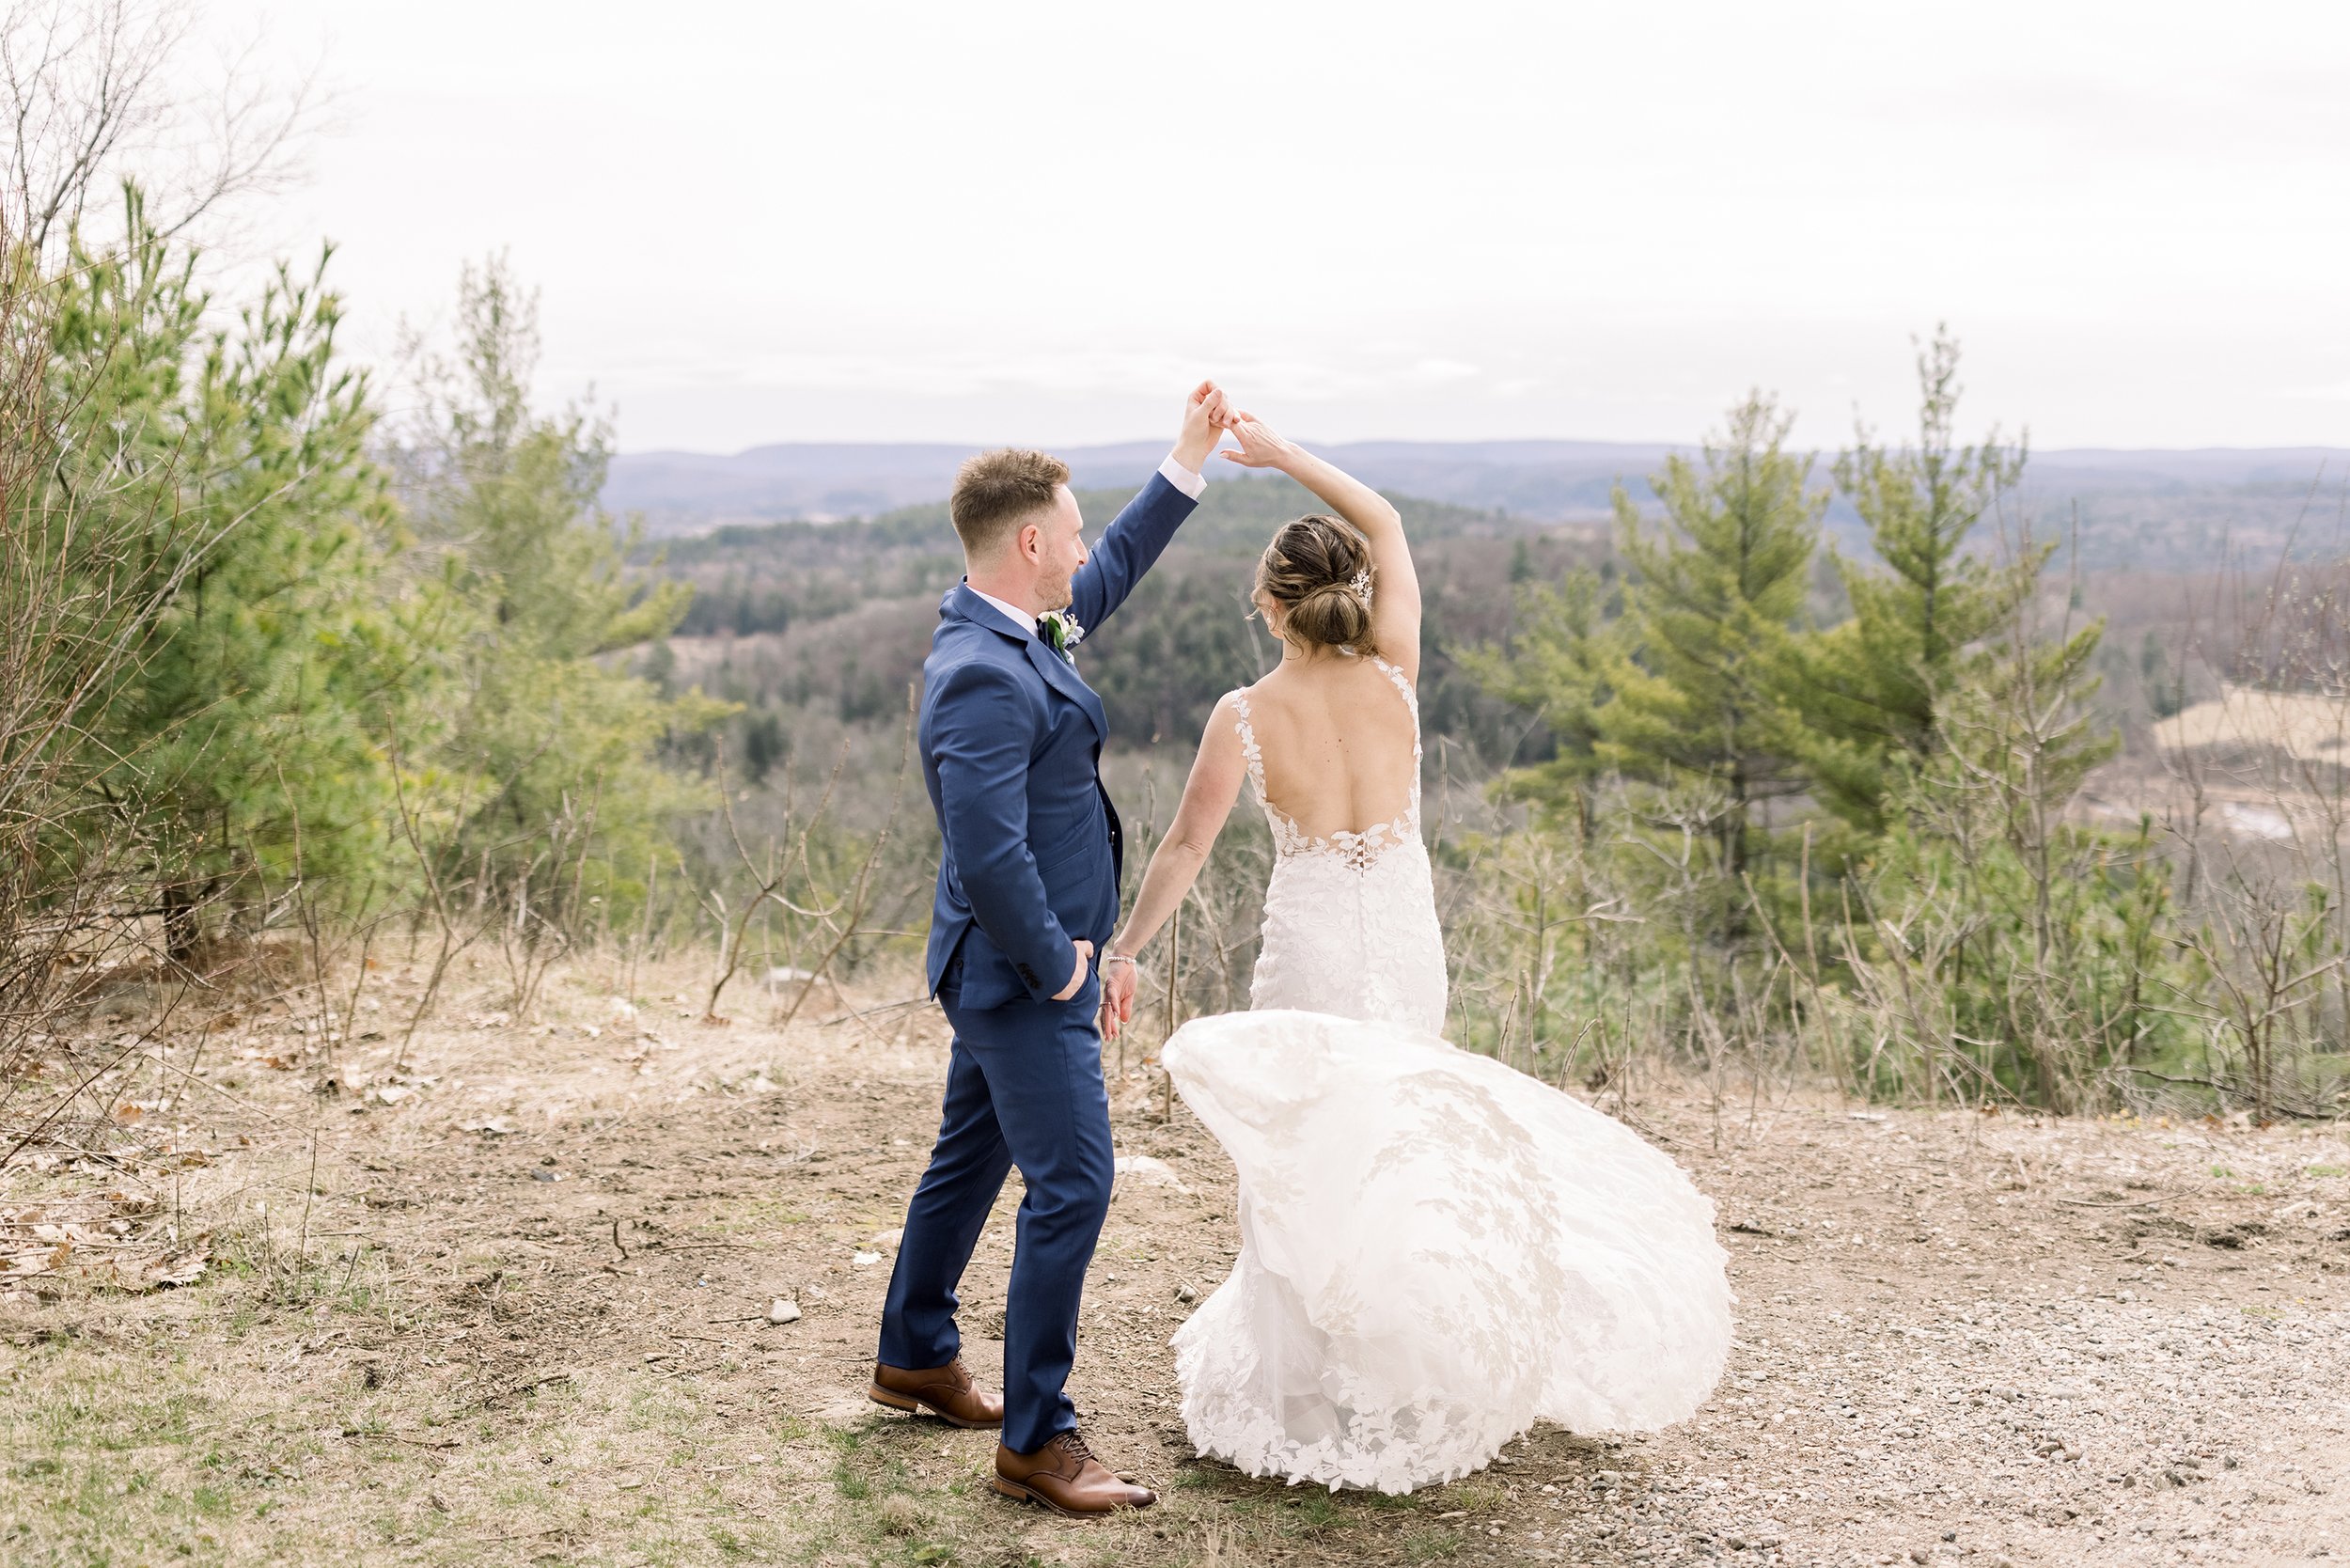  The groom twirls his bride around while dancing on a mountain by Chelsea Mason Photography. newlyweds dance twirl wedding gown #ChelseaMasonPhotography #ChelseaMasonWeddings #WakefieldWeddings #LeBelvedere #Wakefieldweddingphotographers 